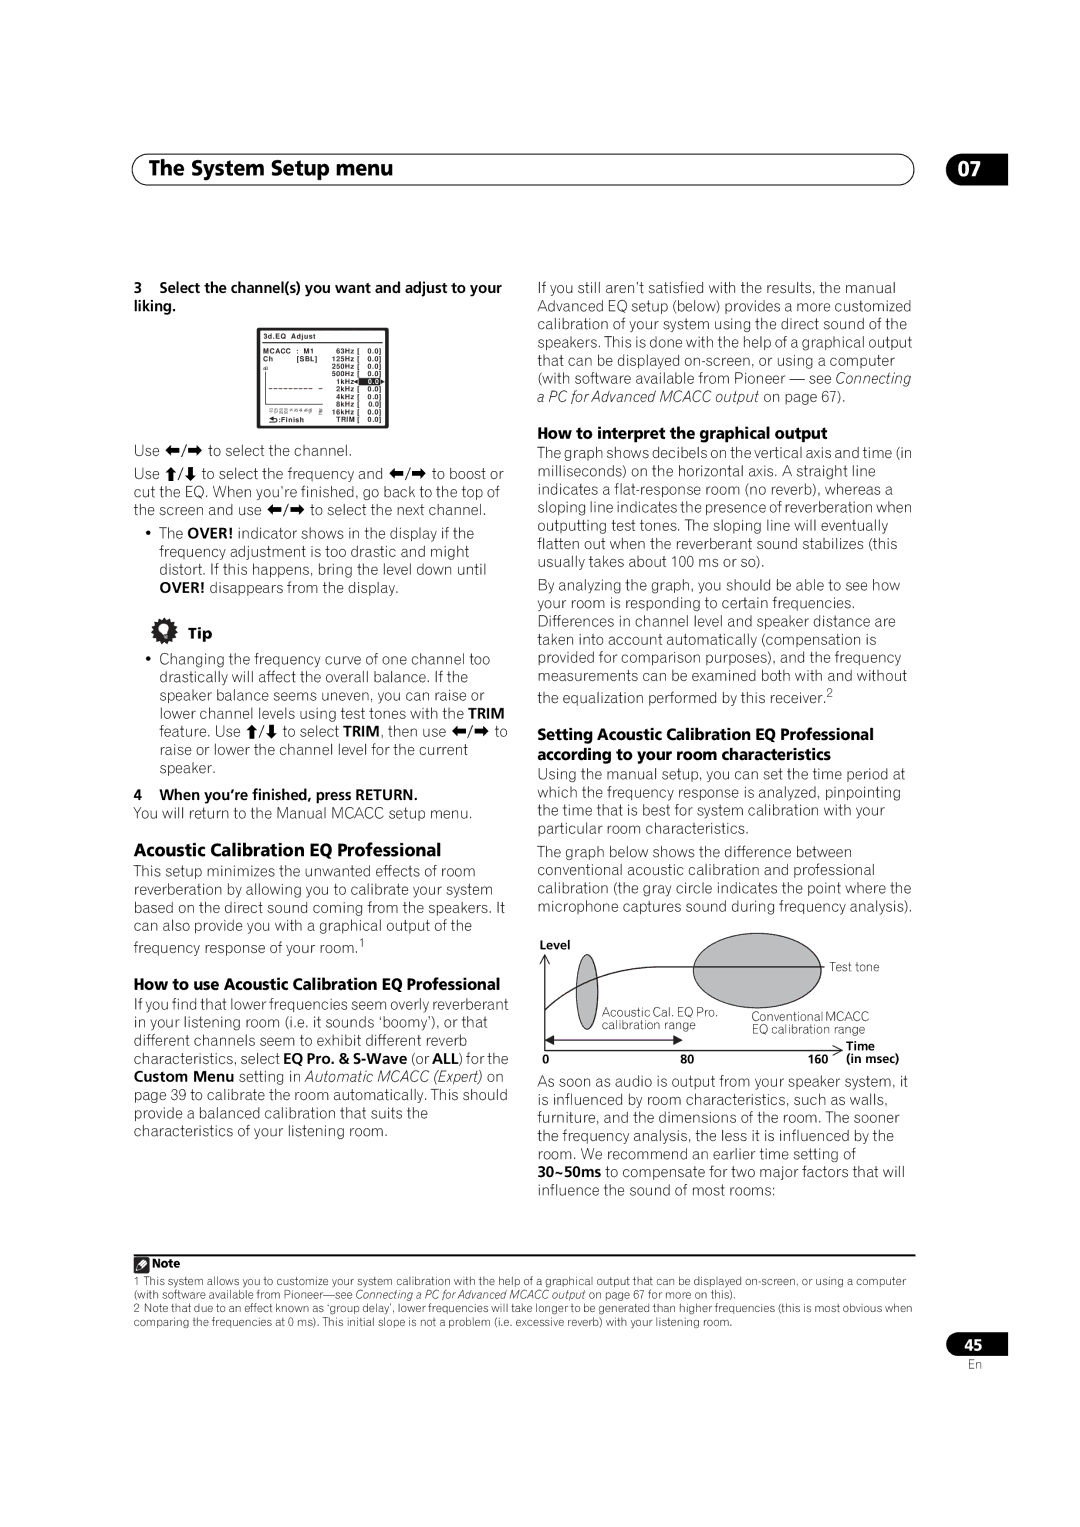 Pioneer VSX-03TXH manual How to use Acoustic Calibration EQ Professional, How to interpret the graphical output 